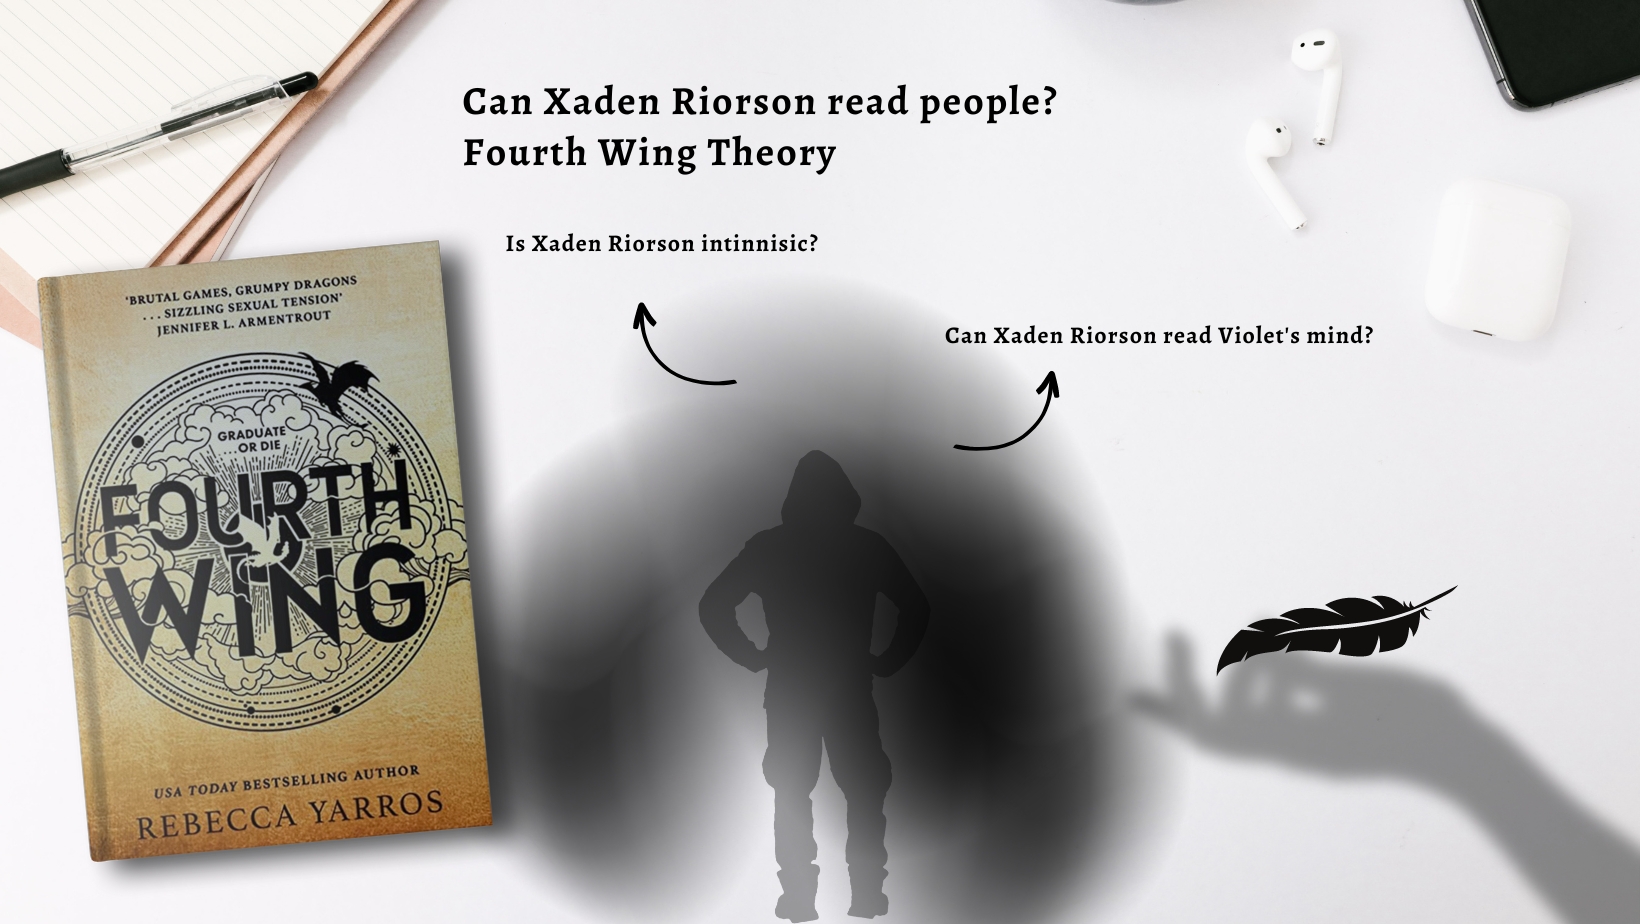 Fourth Wing Theory: is Xaden Riorson a mind reader